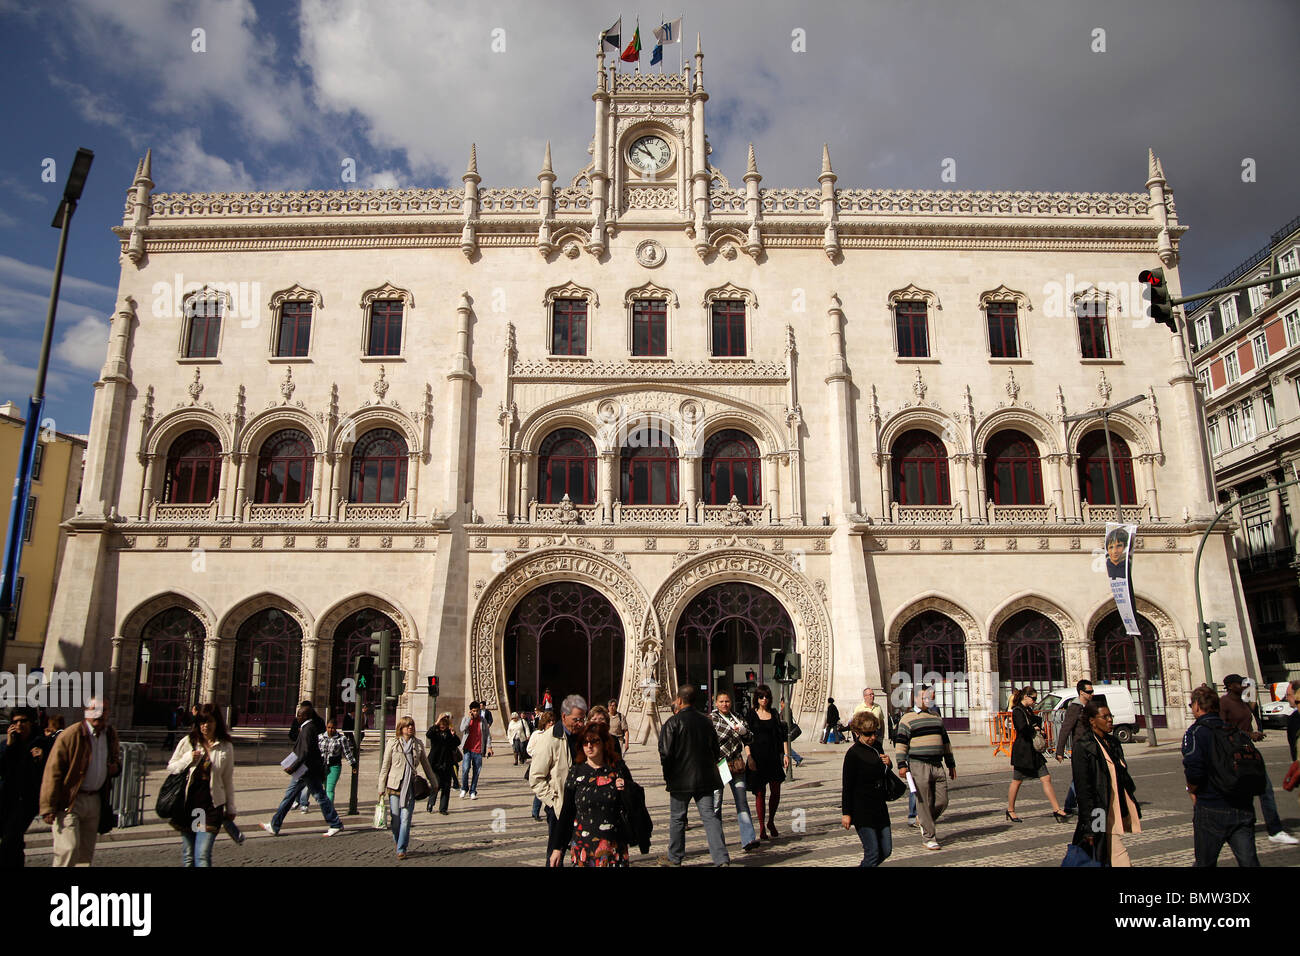 facade of the Train Station Rossio in Lisbon, Portugal, Europe Stock Photo